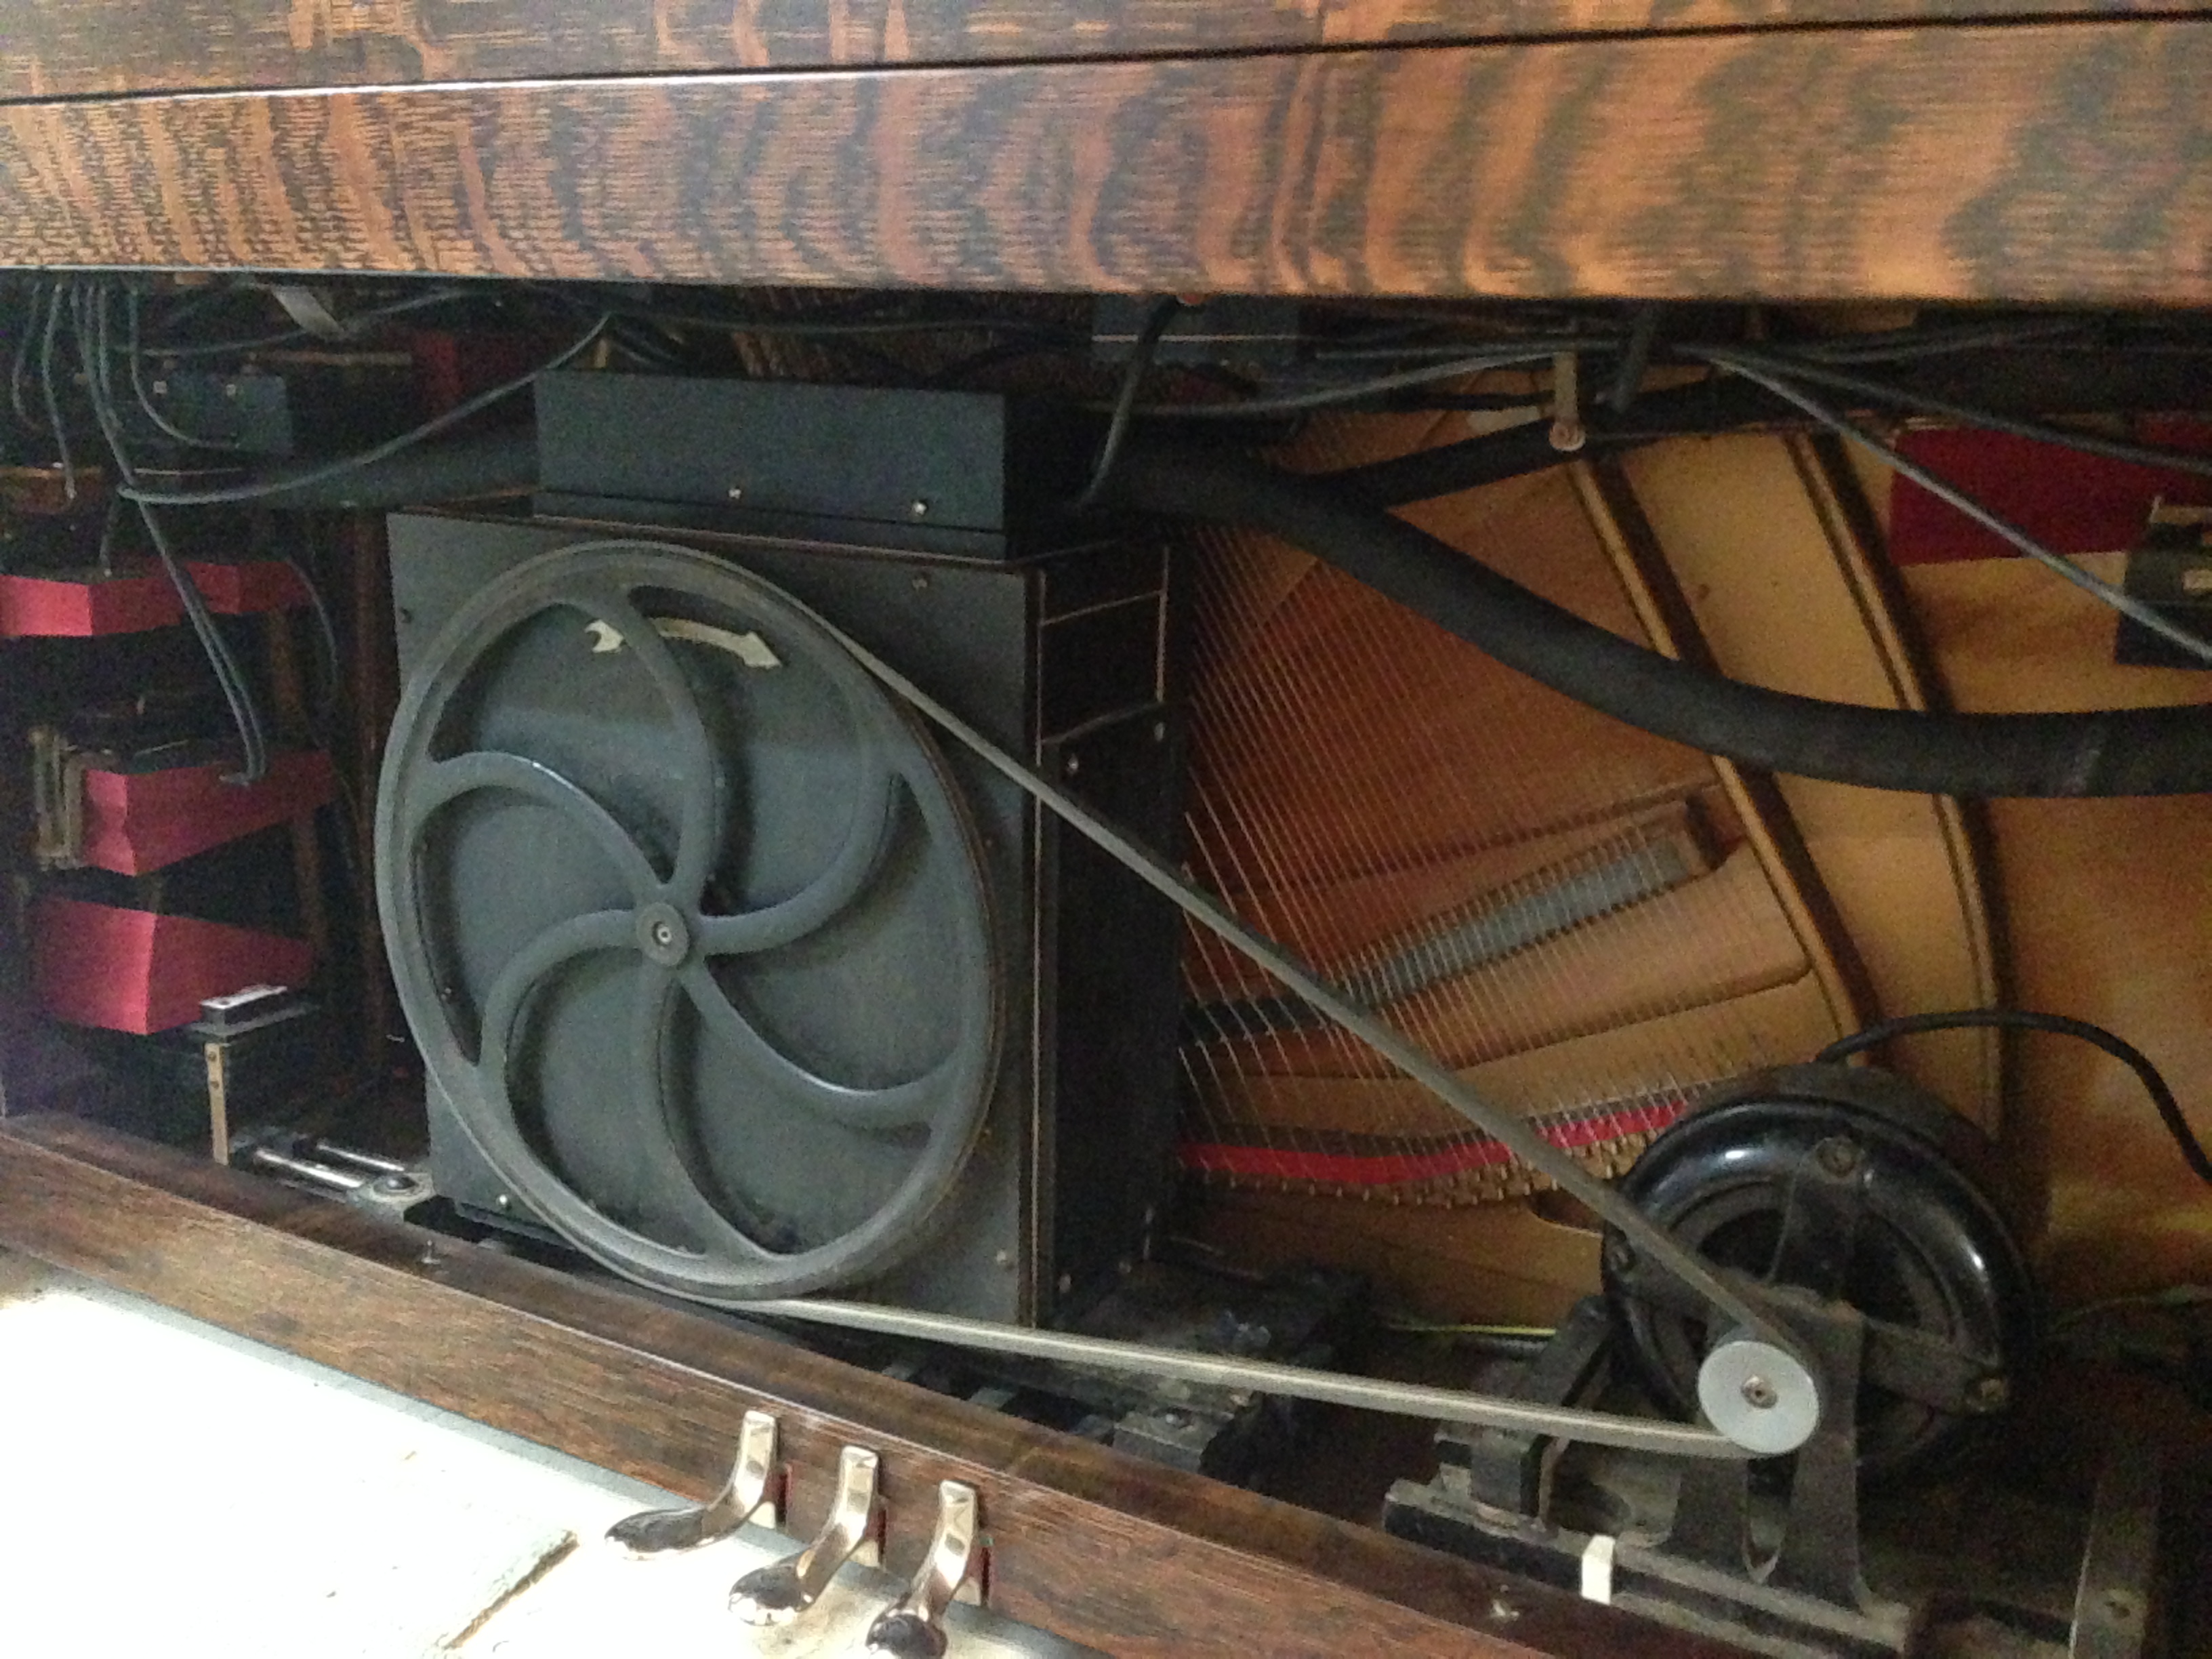 The lower half of the piano